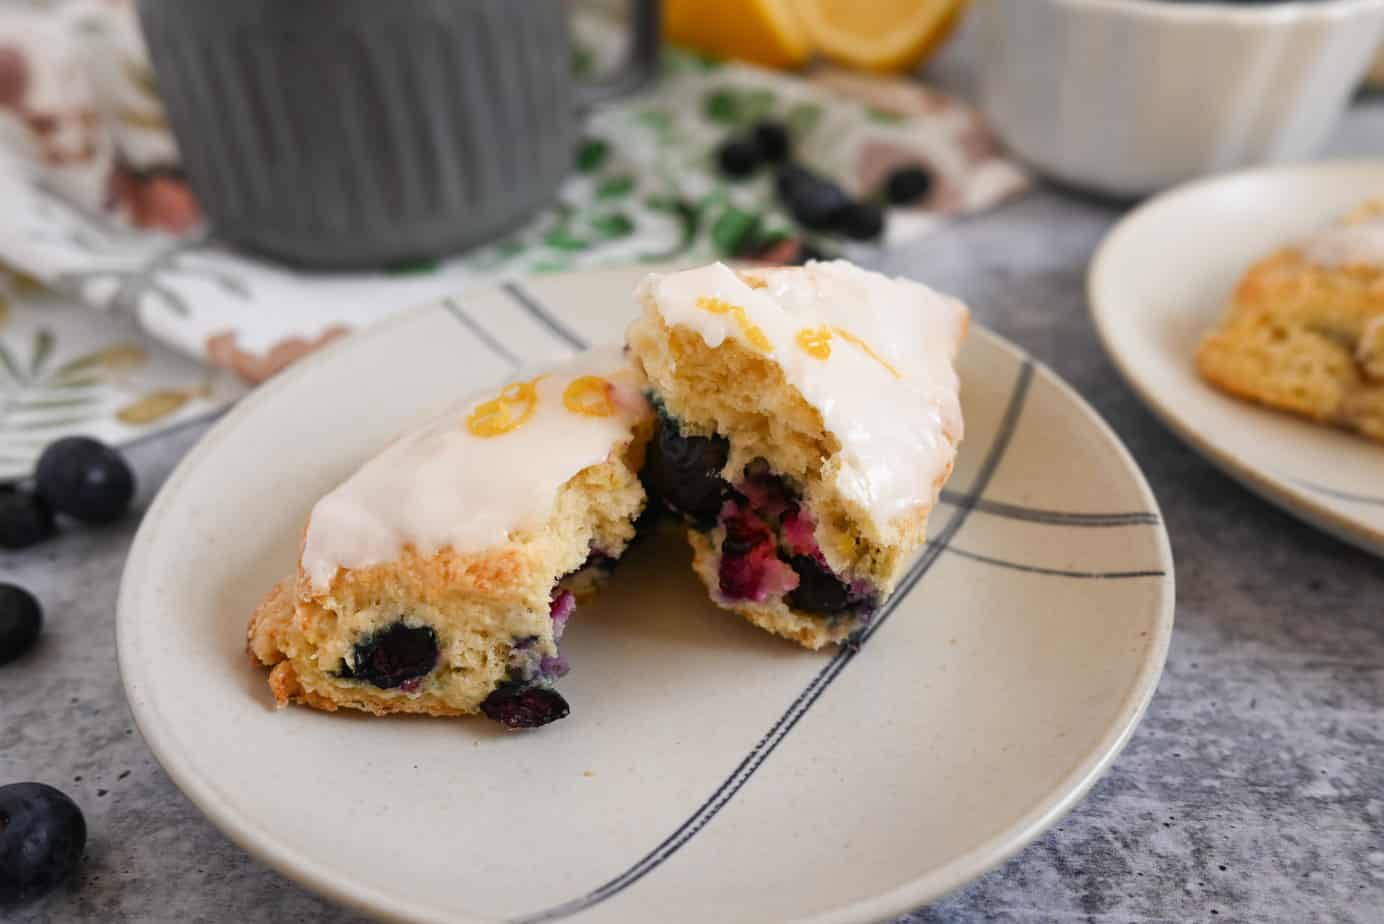 Blueberry lemon scone broken in half and set on a cream and blue plate.